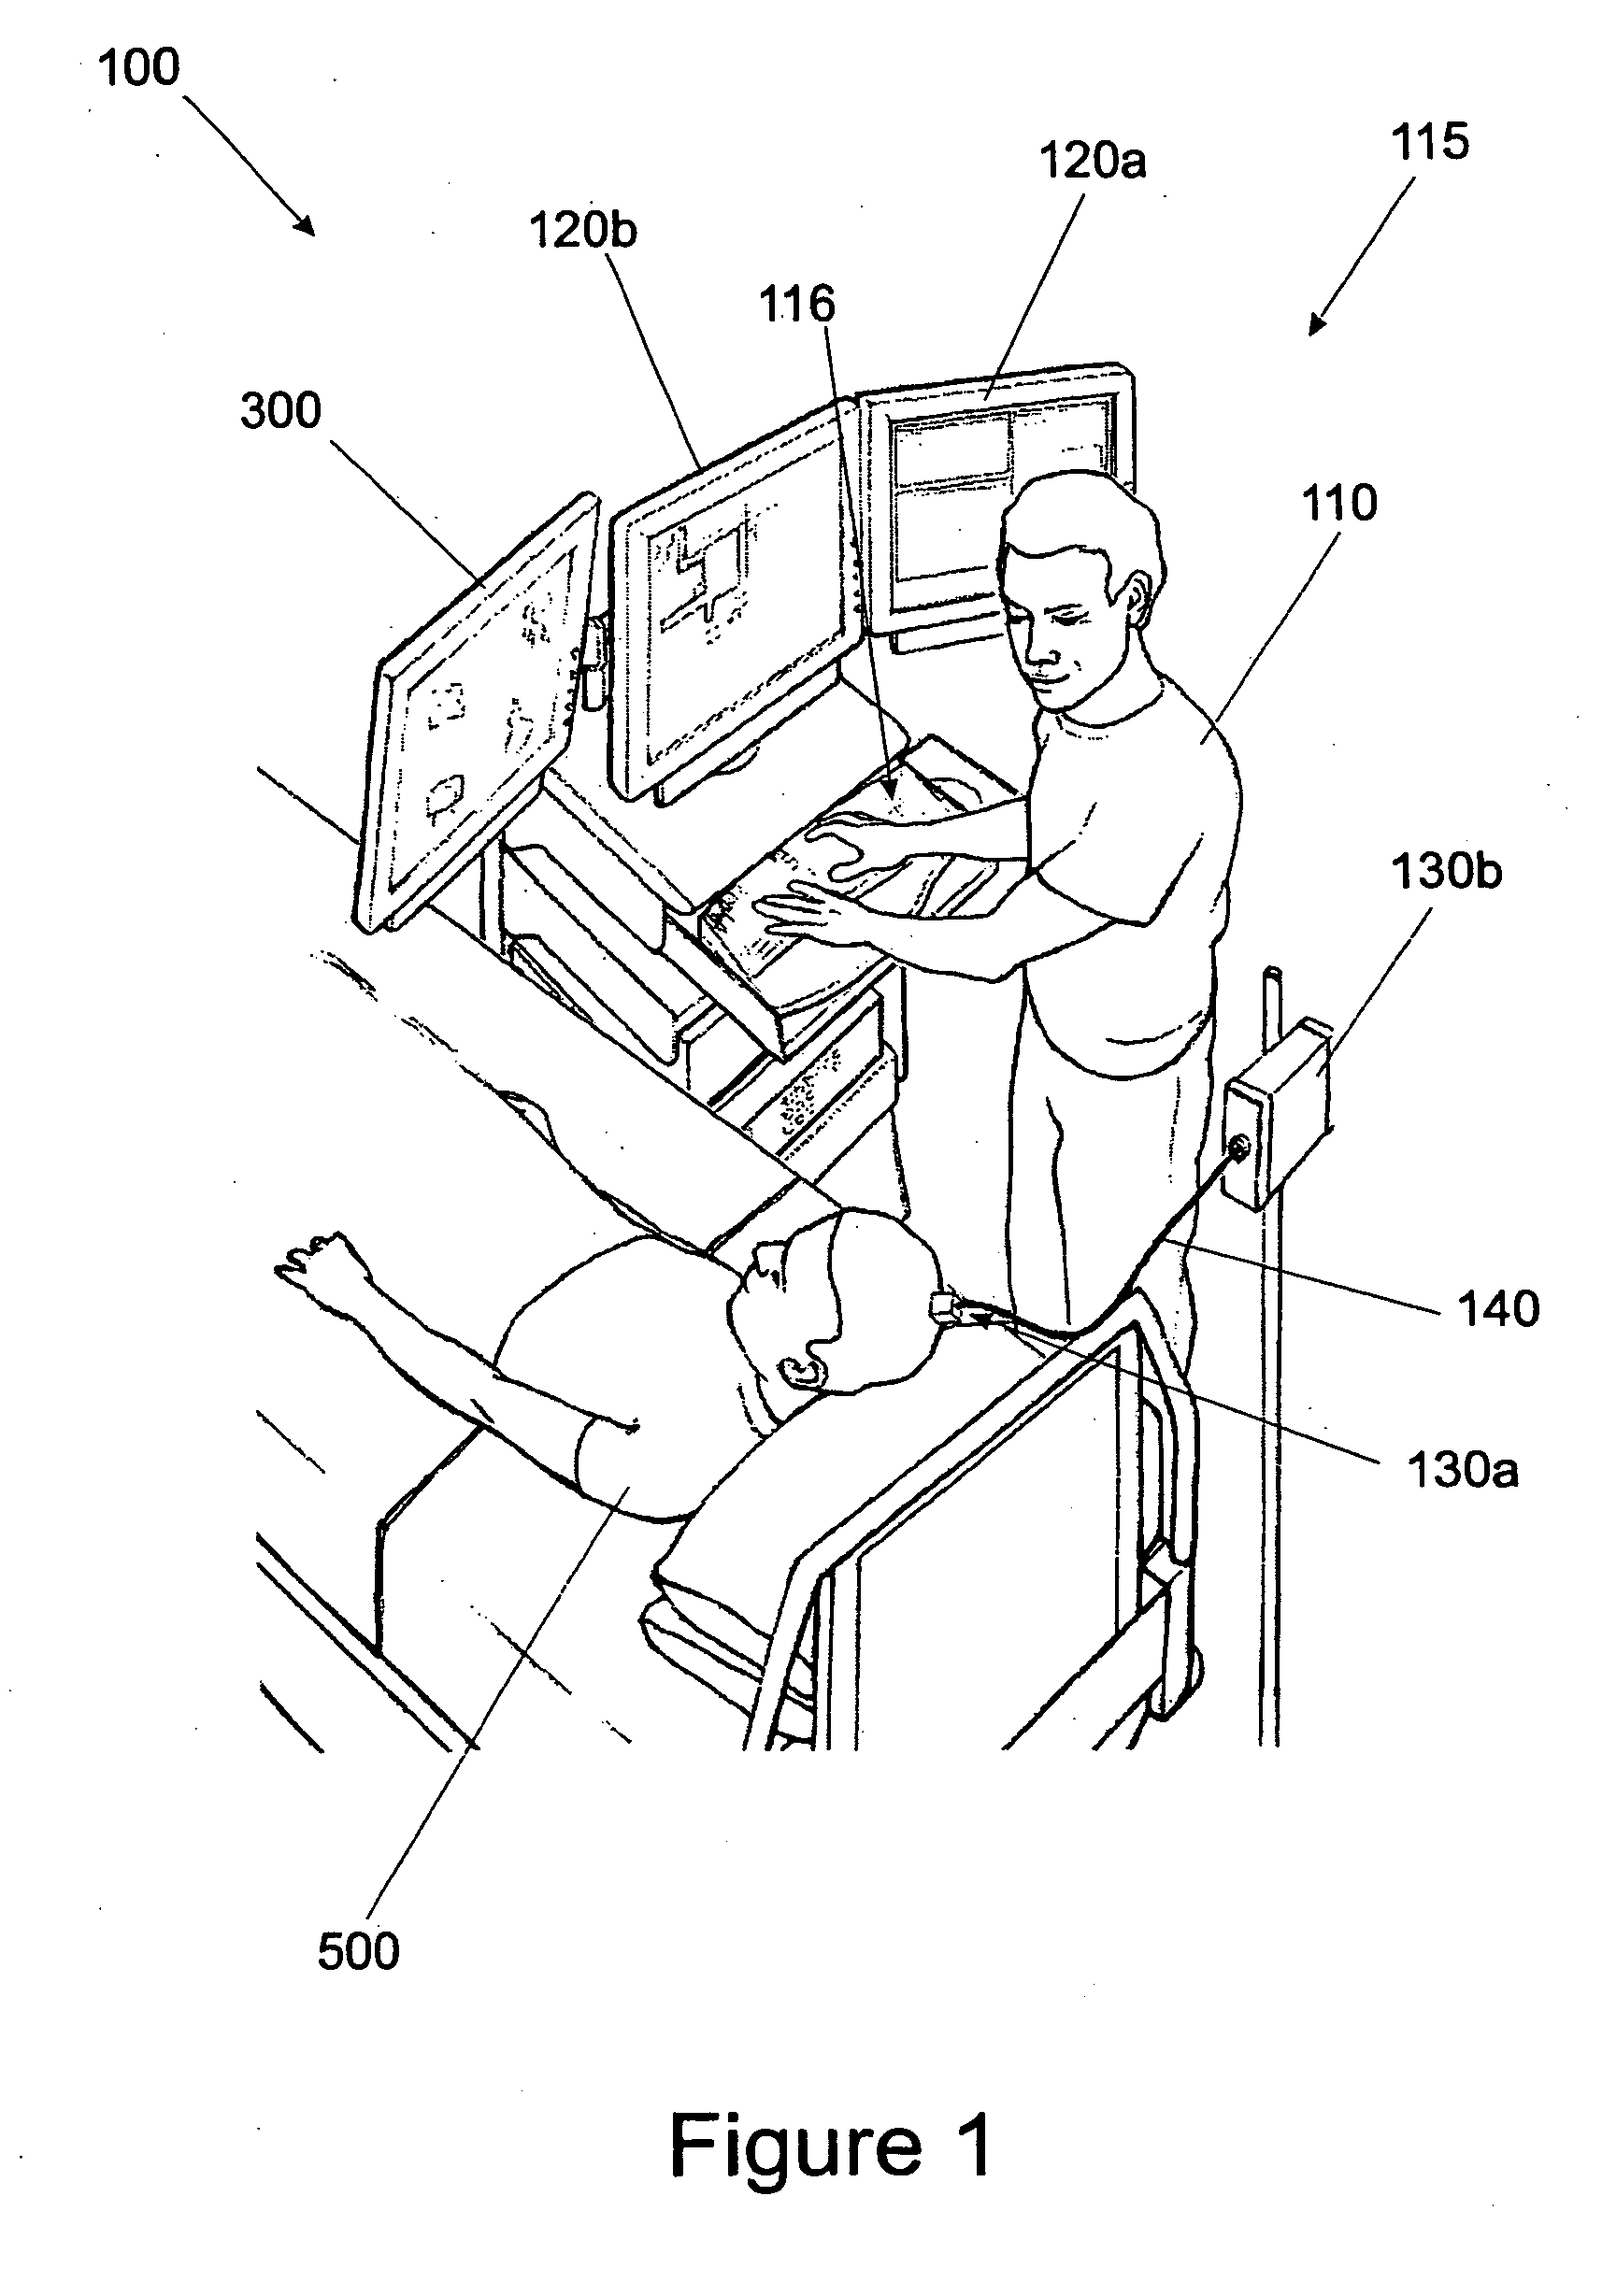 Neural interface system and method for neural control of multiple devices